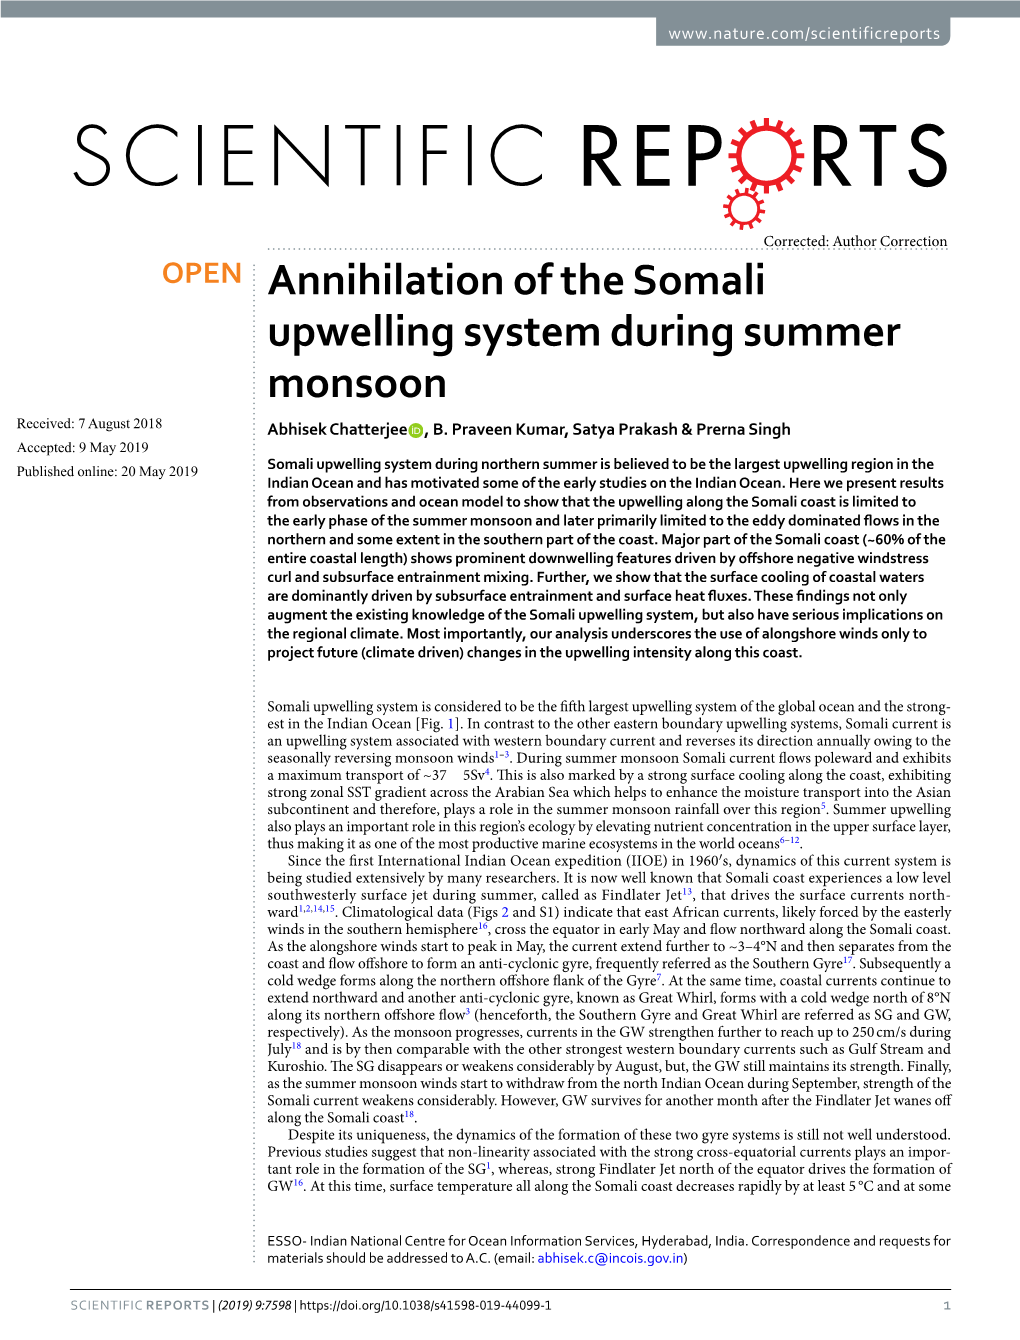 Annihilation of the Somali Upwelling System During Summer Monsoon Received: 7 August 2018 Abhisek Chatterjee , B